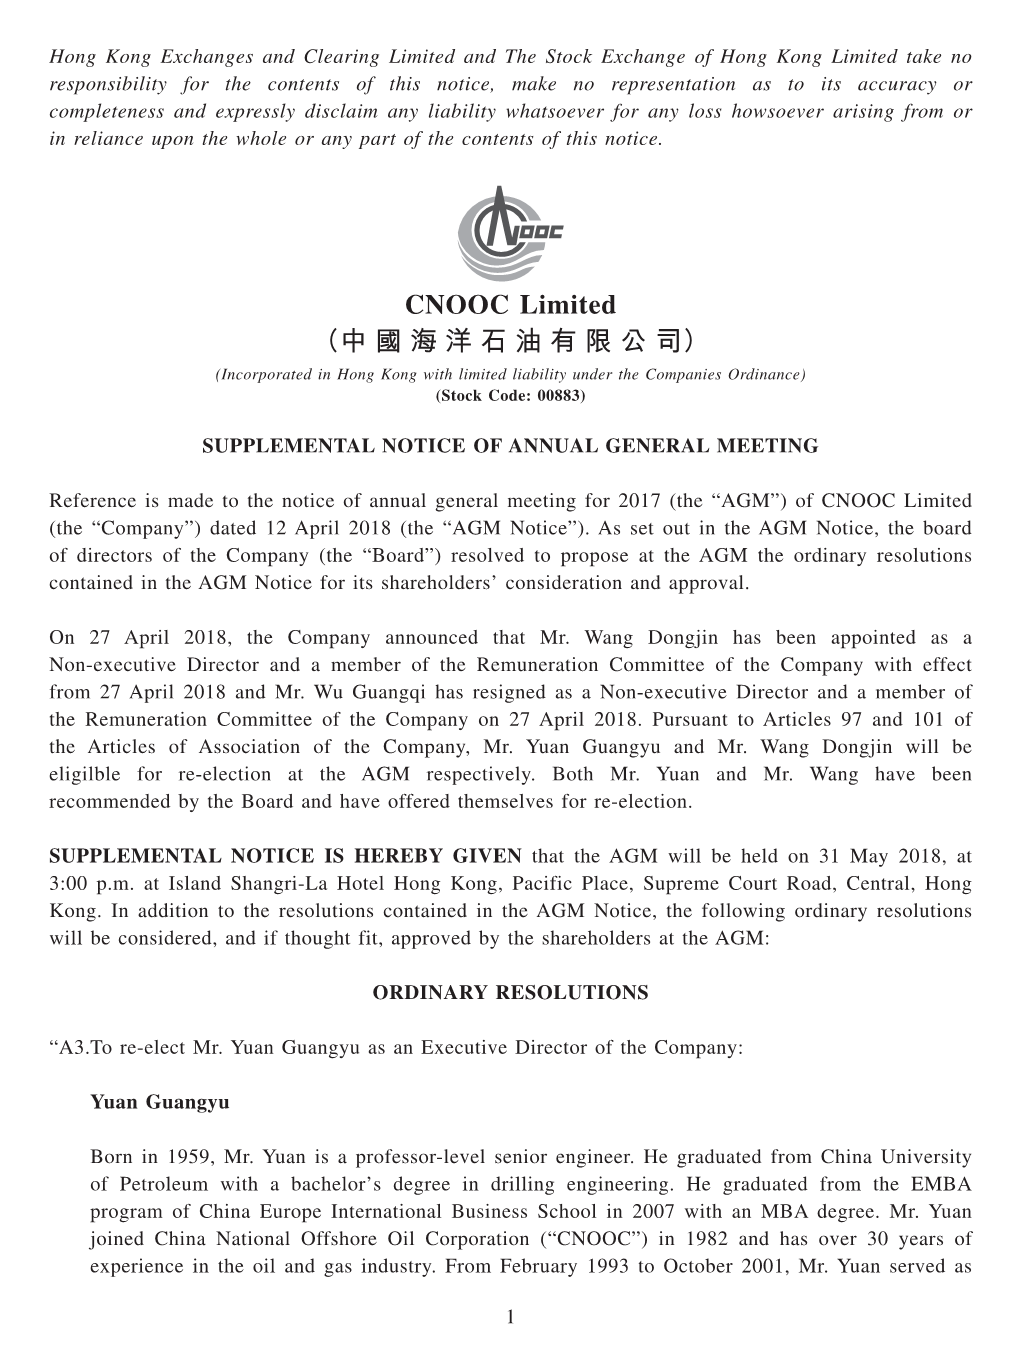 CNOOC Limited （中國海洋石油有限公司） (Incorporated in Hong Kong with Limited Liability Under the Companies Ordinance) (Stock Code: 00883)